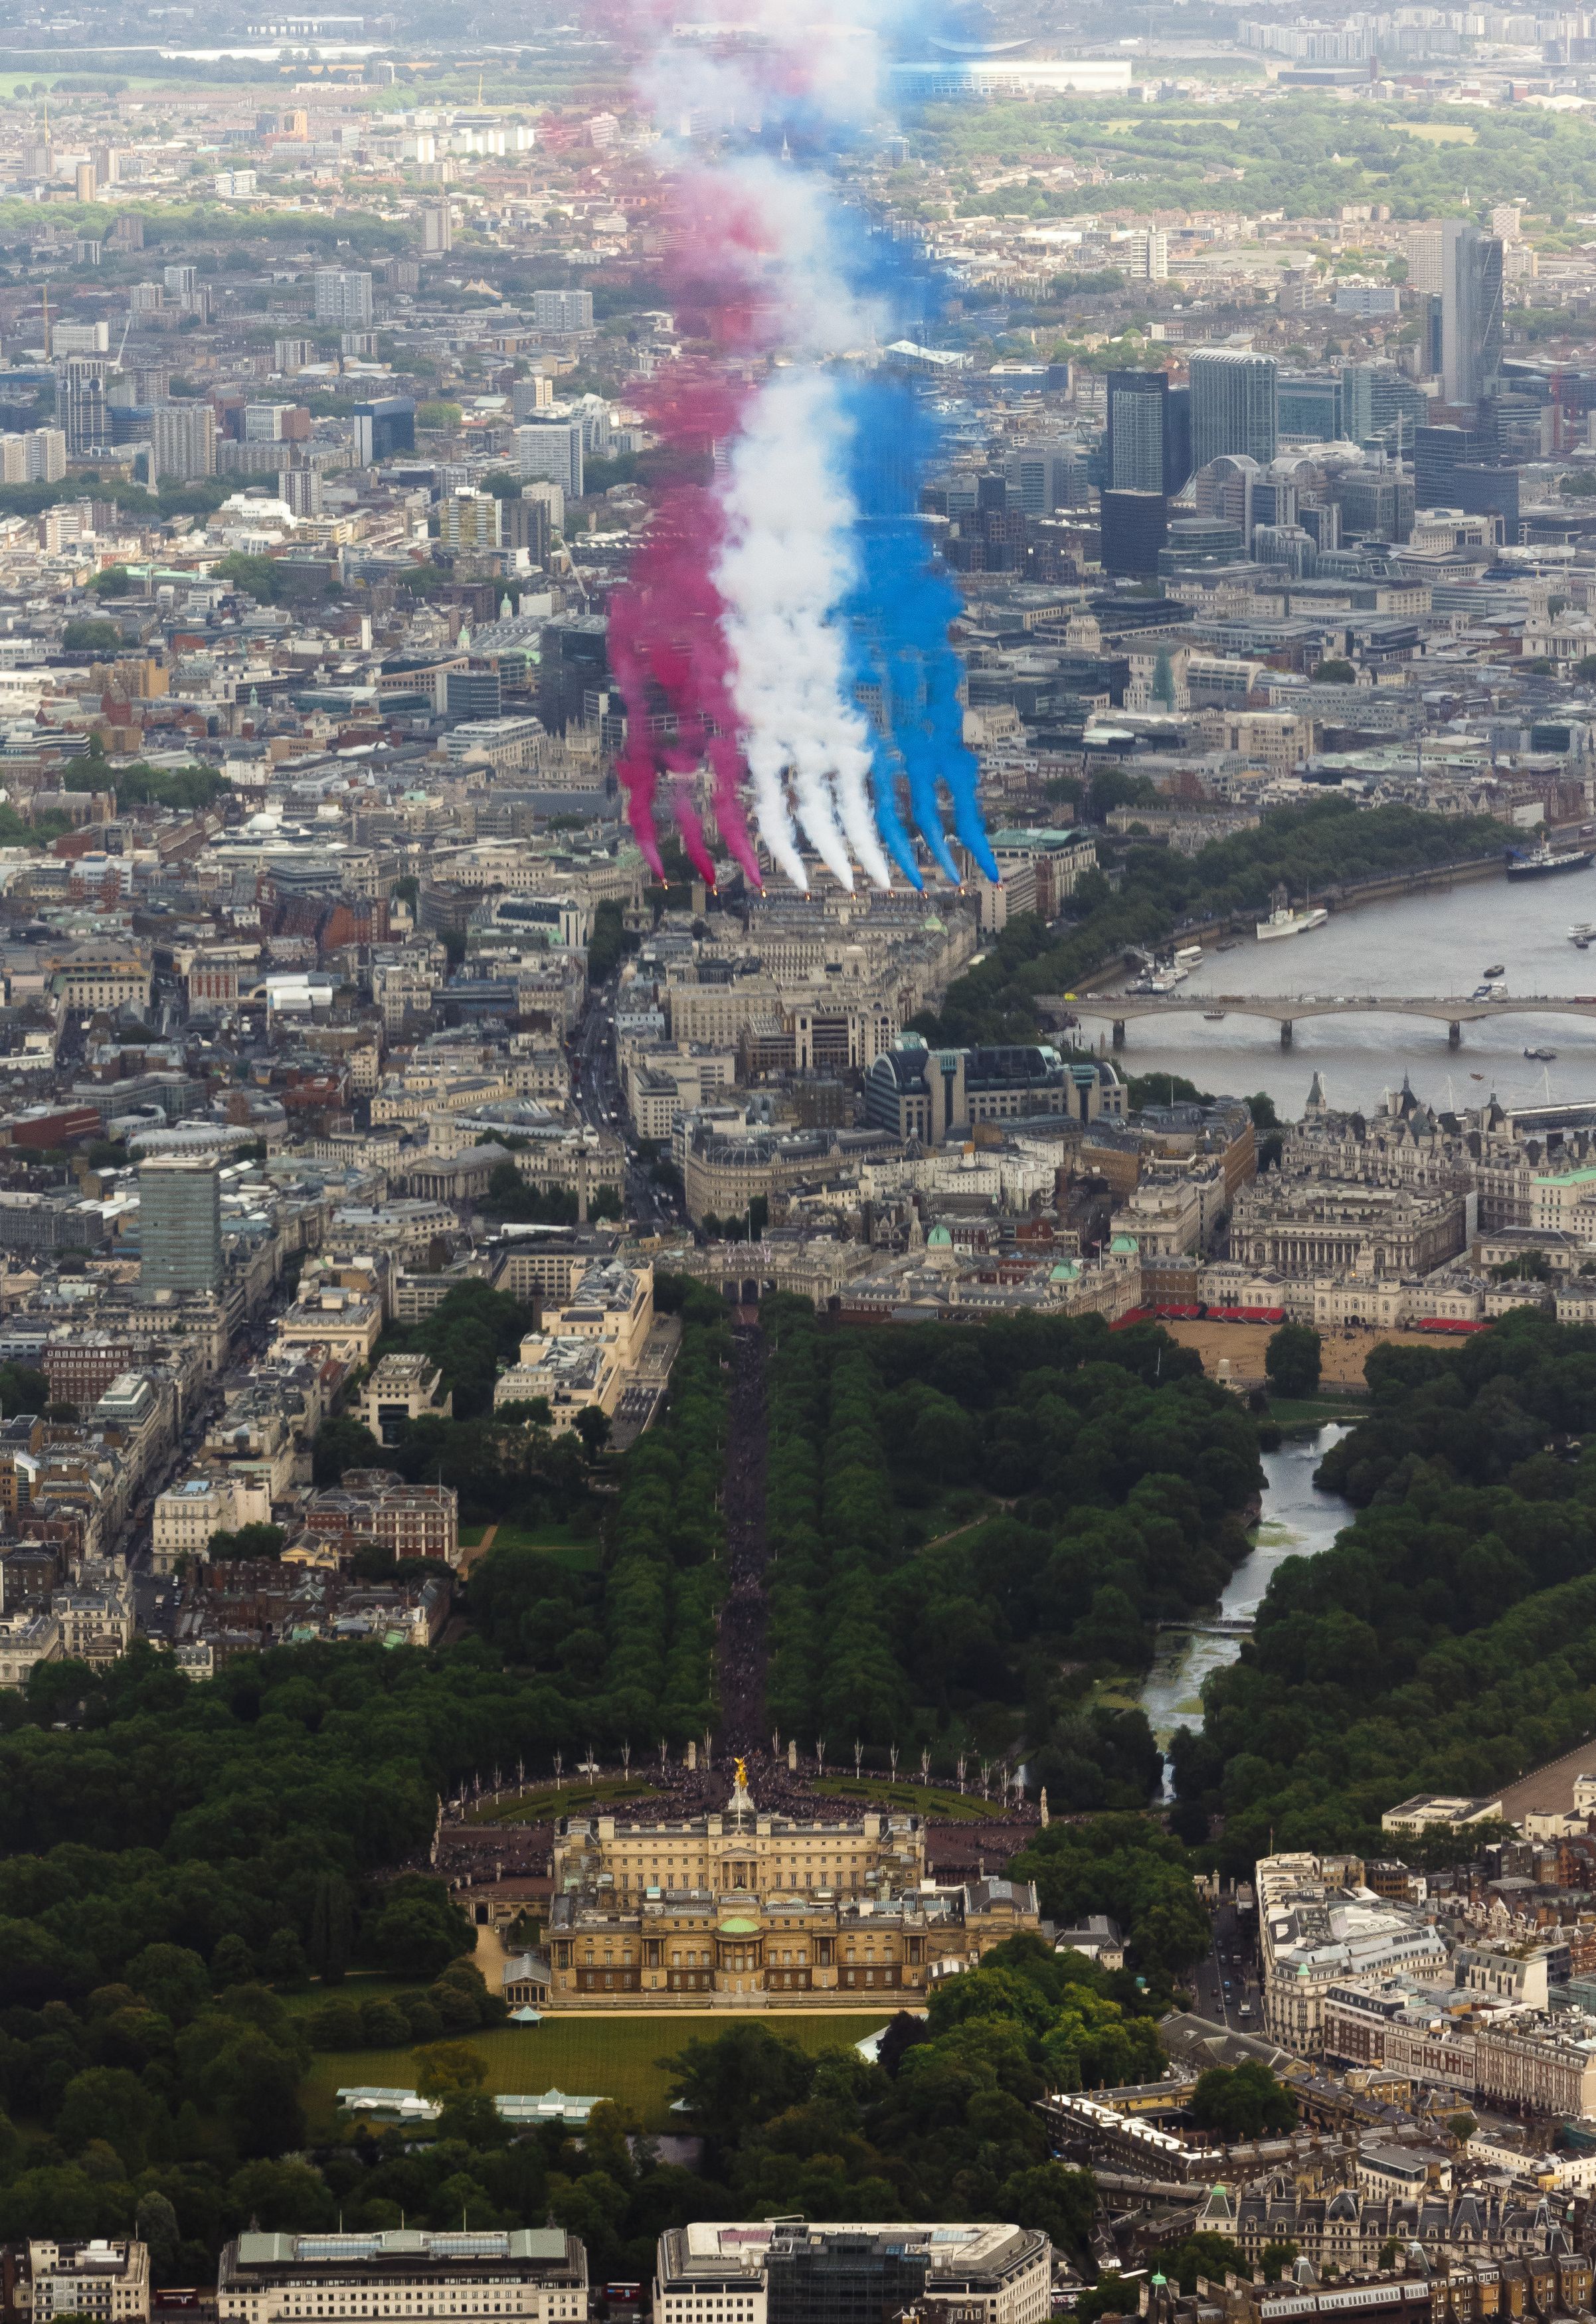 The RAF Red Arrows perform a flypast over Buckingham Palace, central London, following the Trooping the Colour